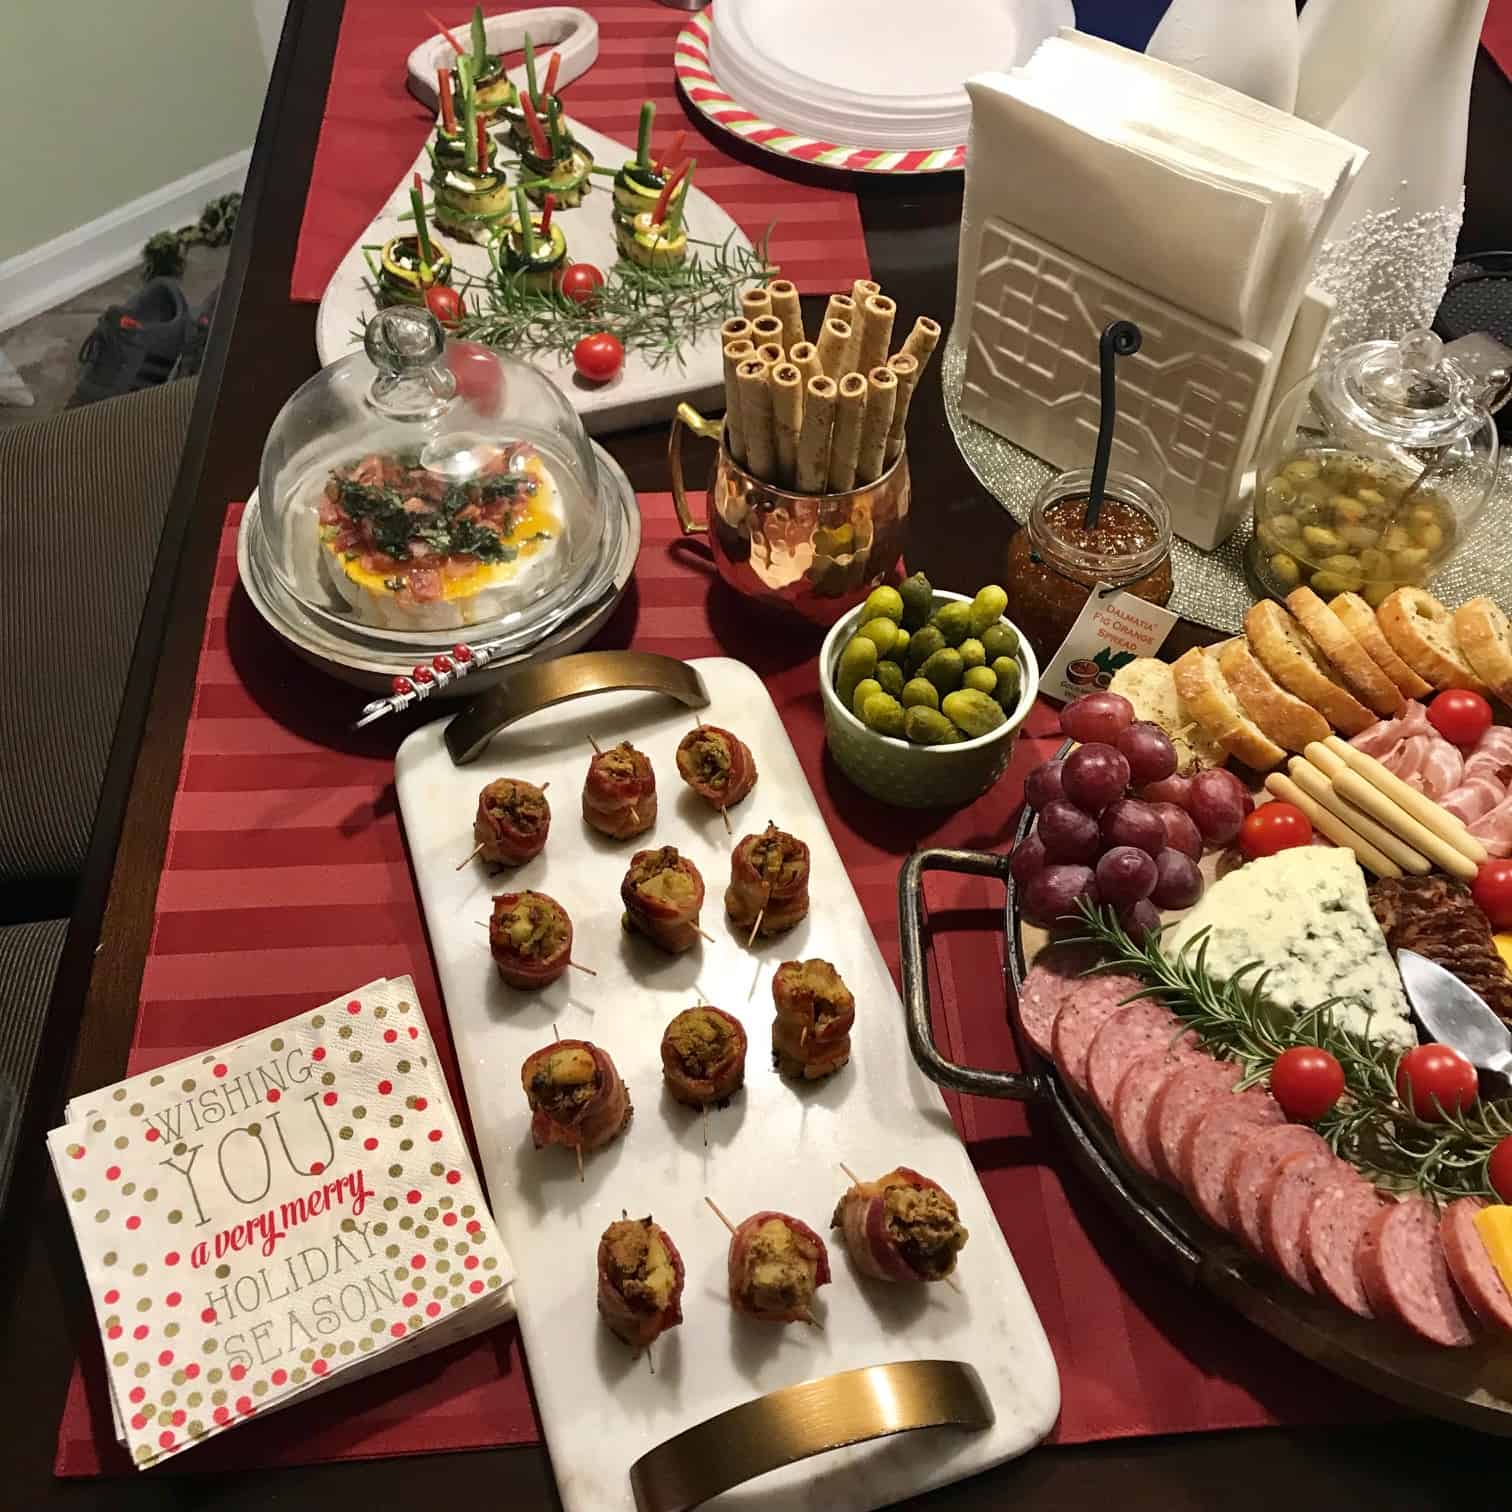 Festive holiday spread with various appetizers and holiday napkins